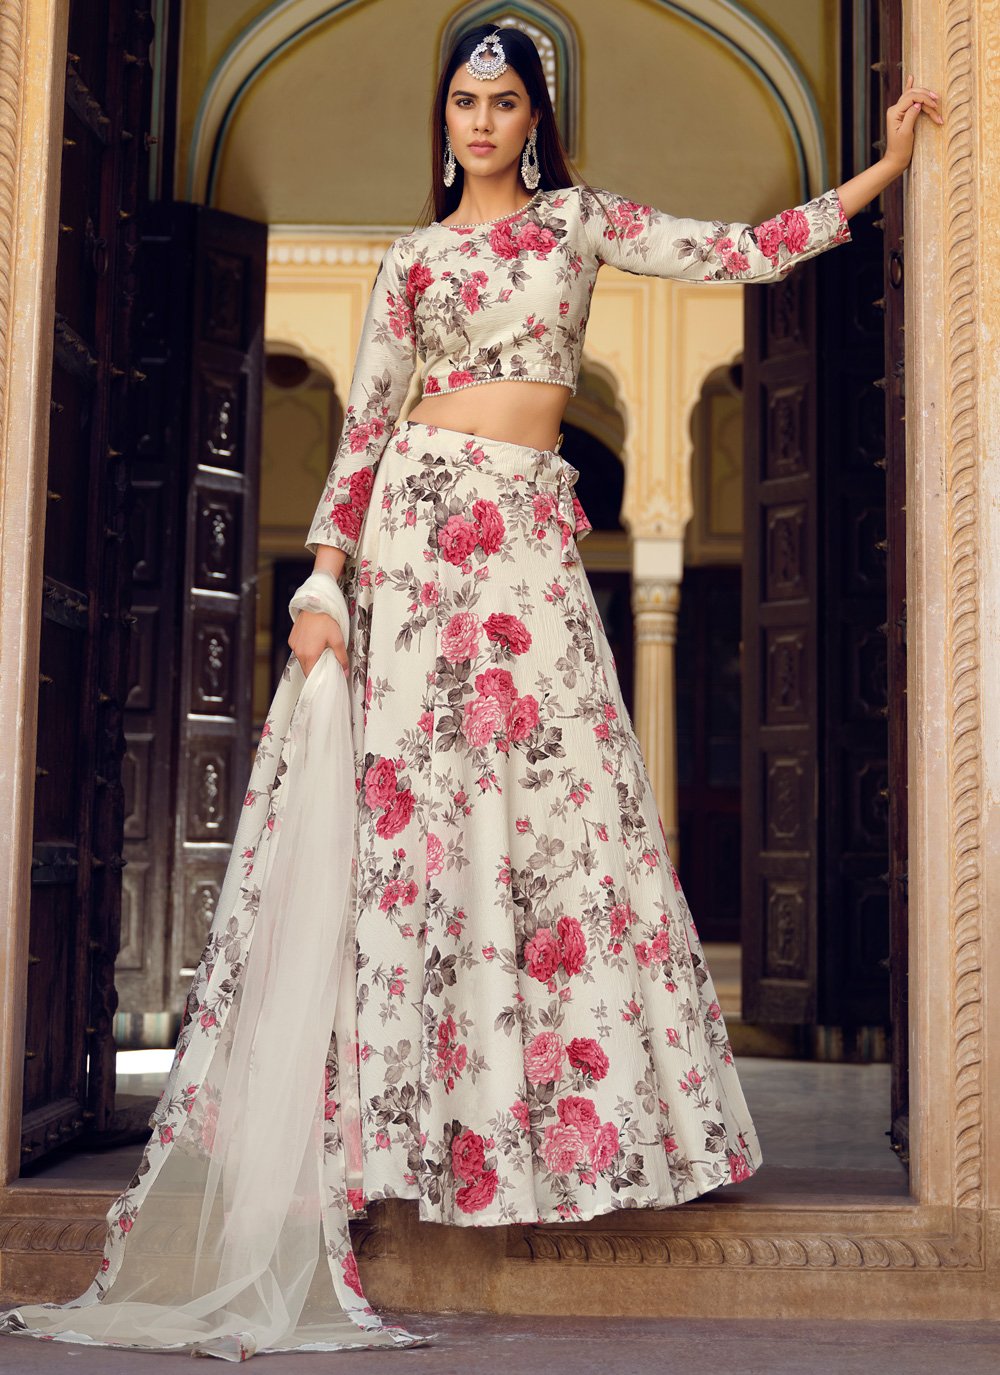 Delightful Spring/ Summer Floral Lehenga and Saree Designs for 2019